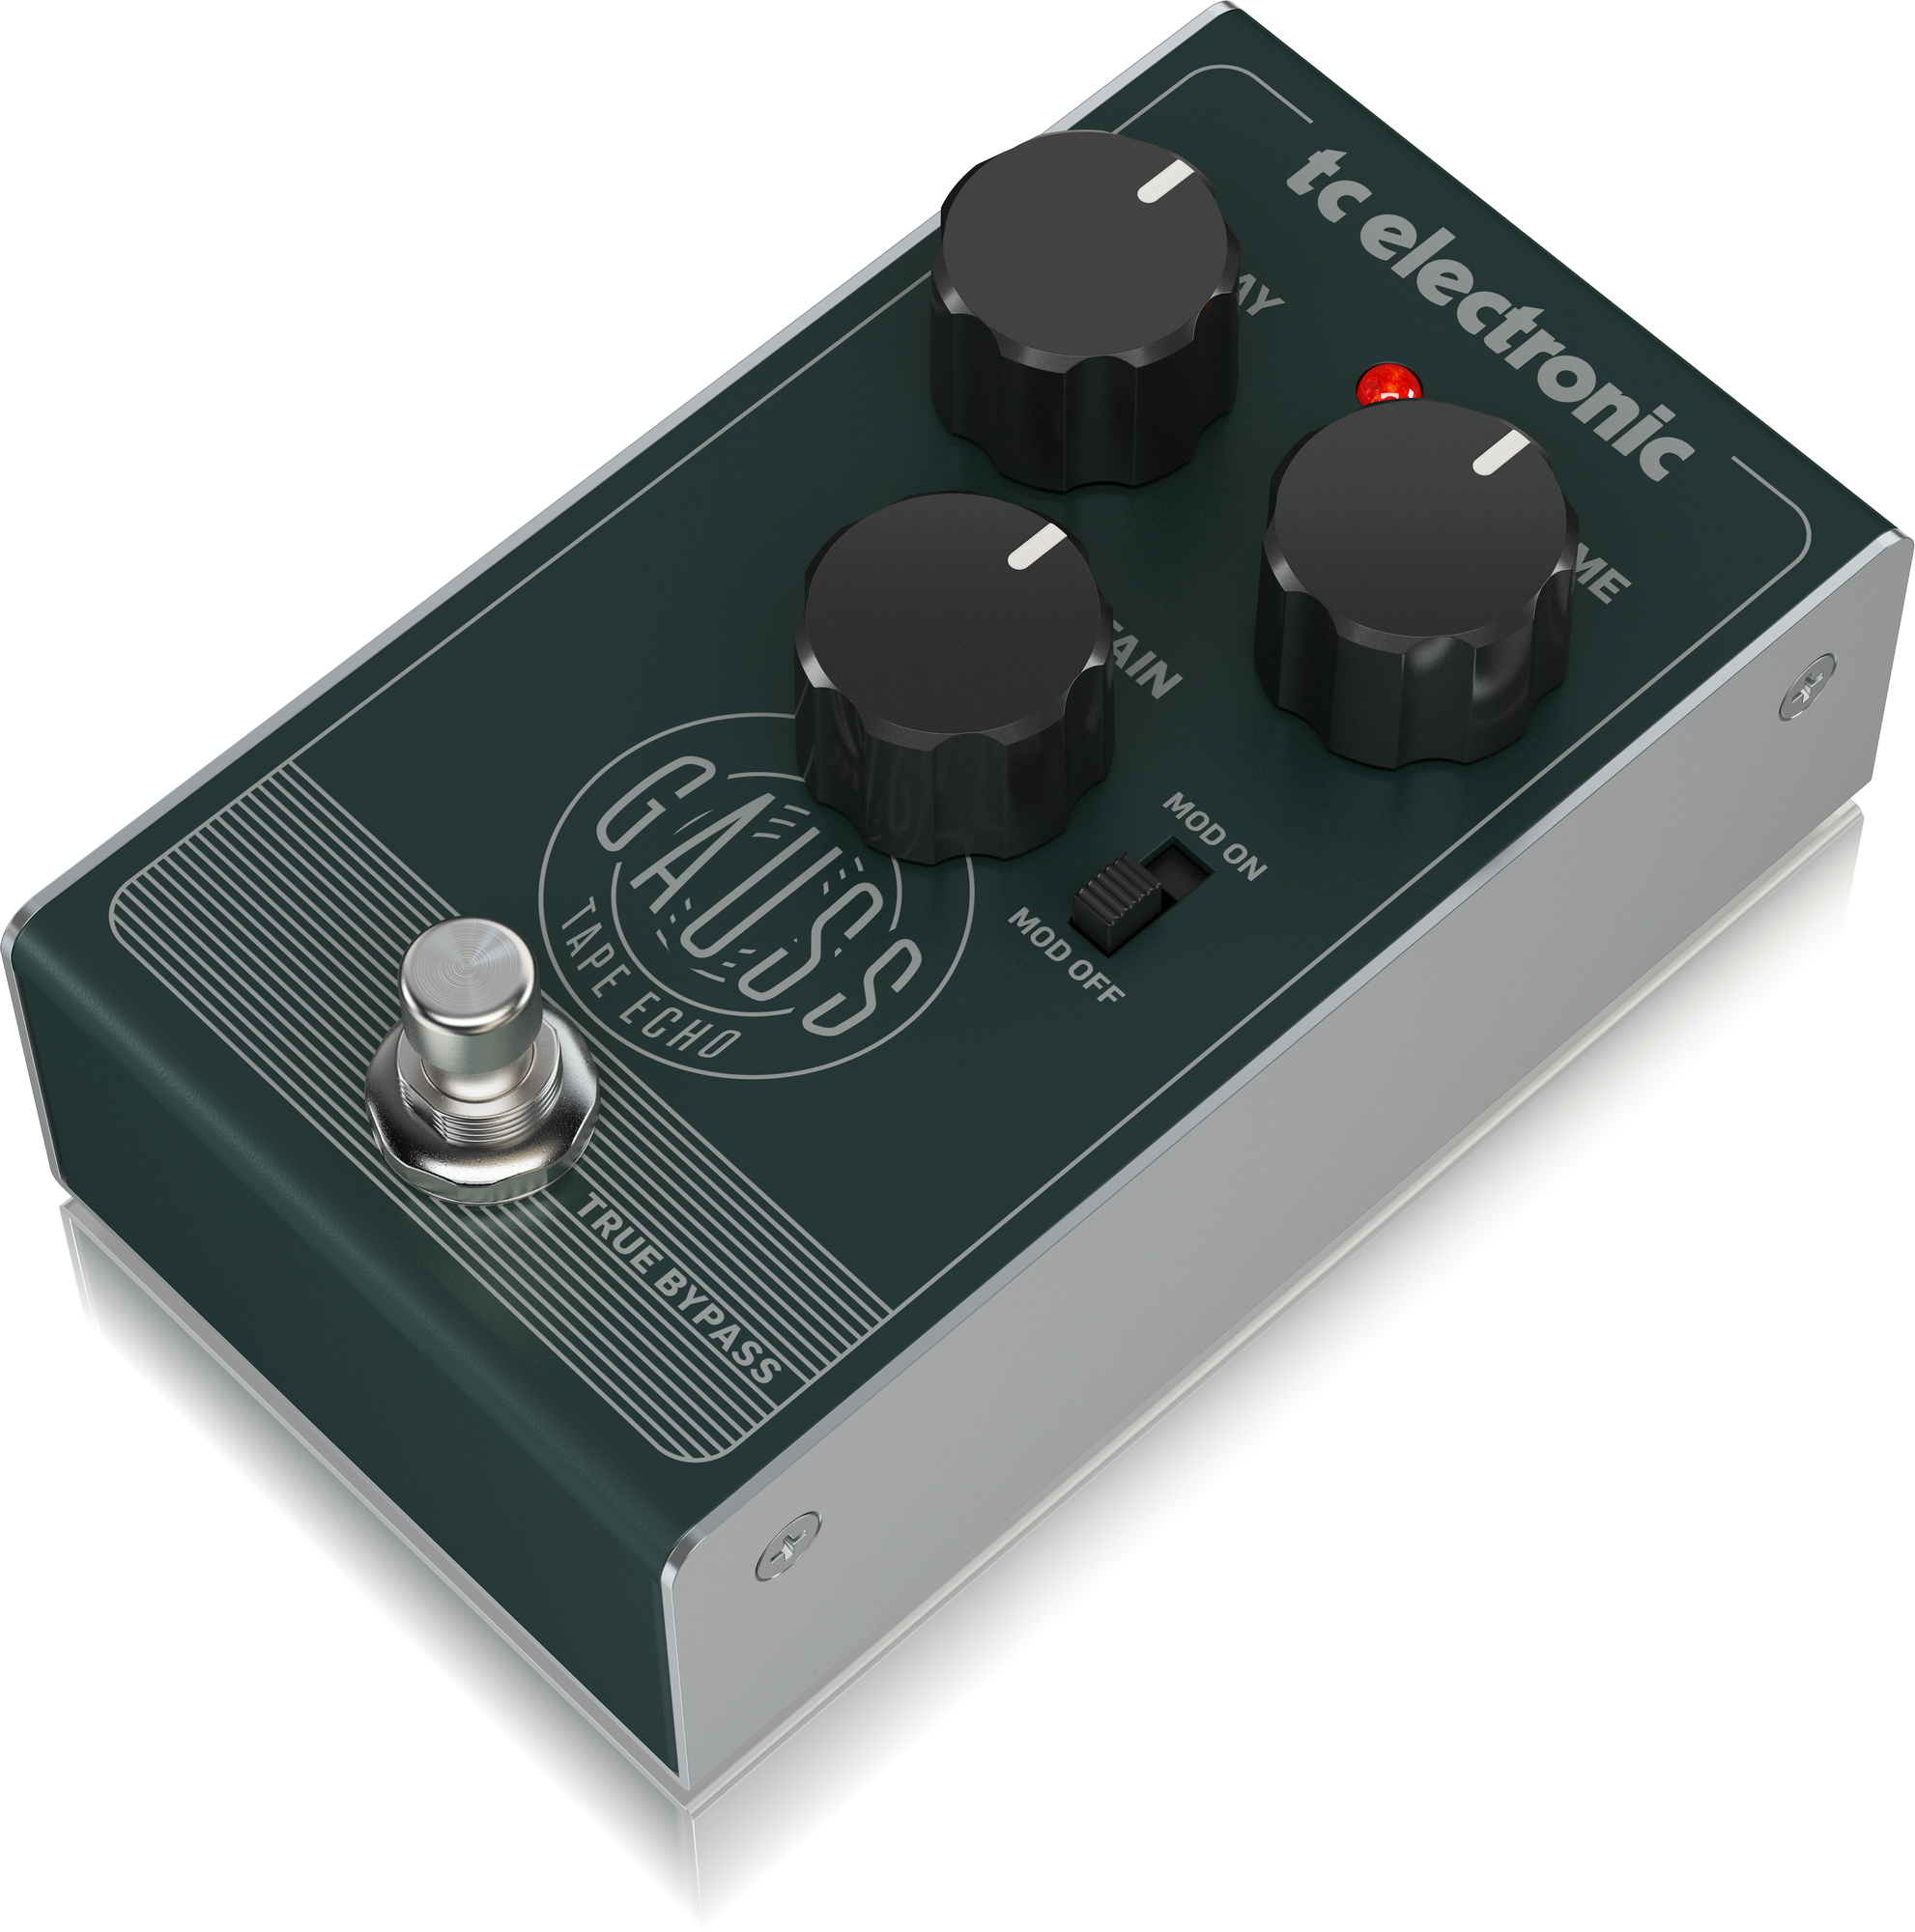 TC Electronic Super-Saturated Tape Echo Pedal with Mod Switch, Delay, Sustain and Volume Controls, TC ELECTRONIC, EFFECTS, tc-electronic-effects-tc-gauss-tape-echo, ZOSO MUSIC SDN BHD